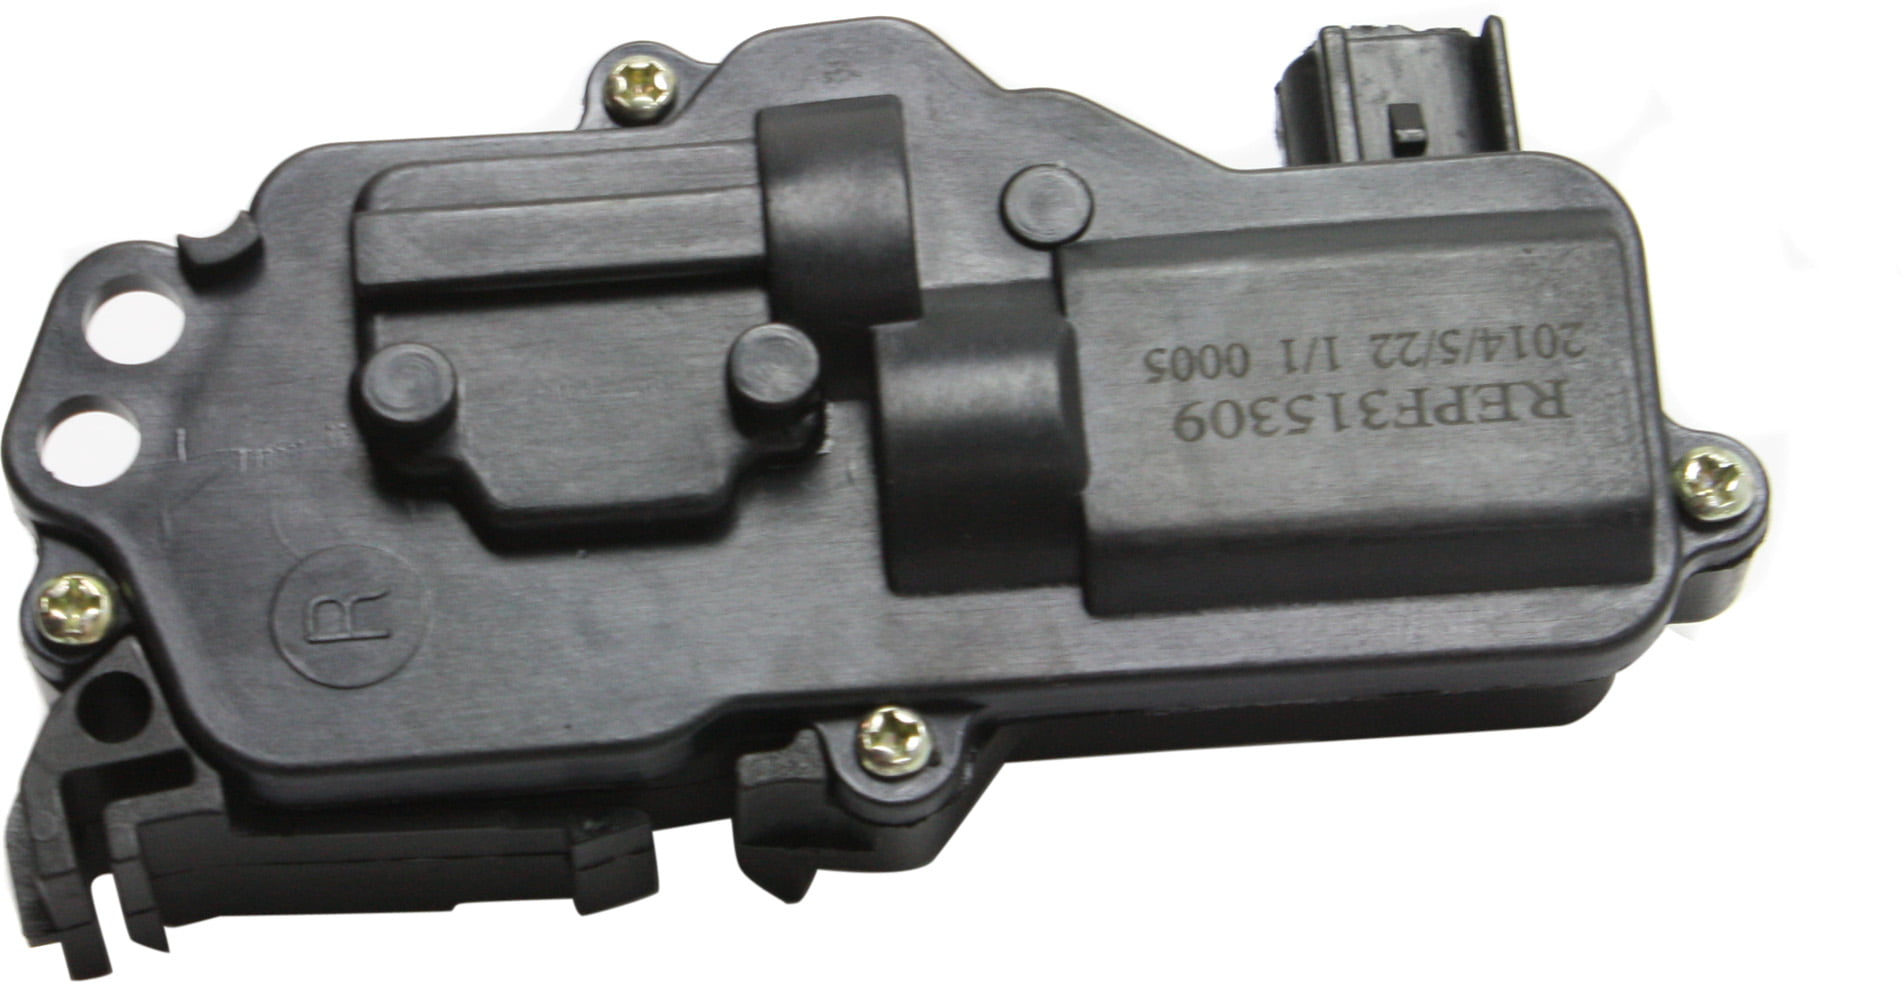 New Door Lock Actuator Front, RH Side for Ford Explorer FO1315113 2002 to 2010 